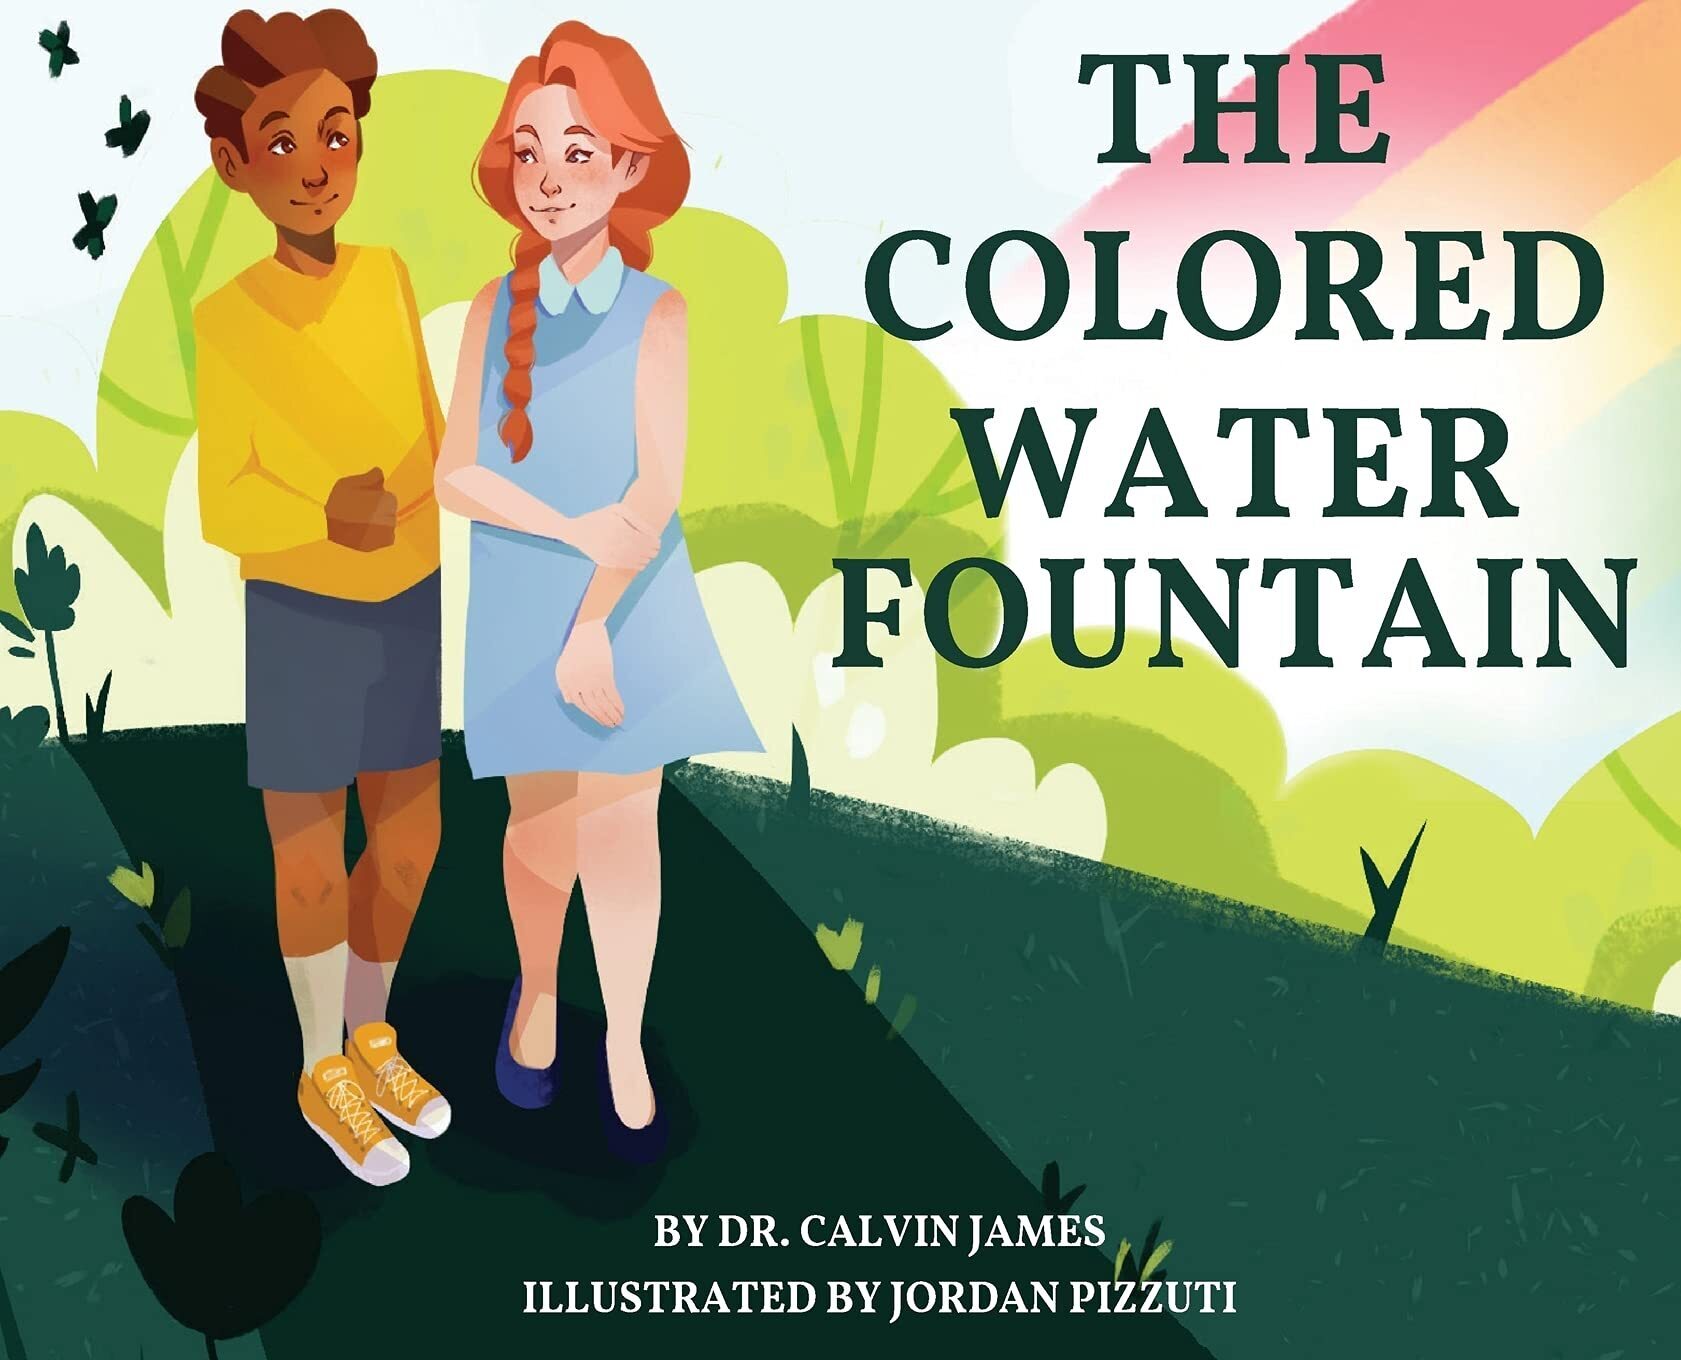 TheColoredWaterFountain.jpg